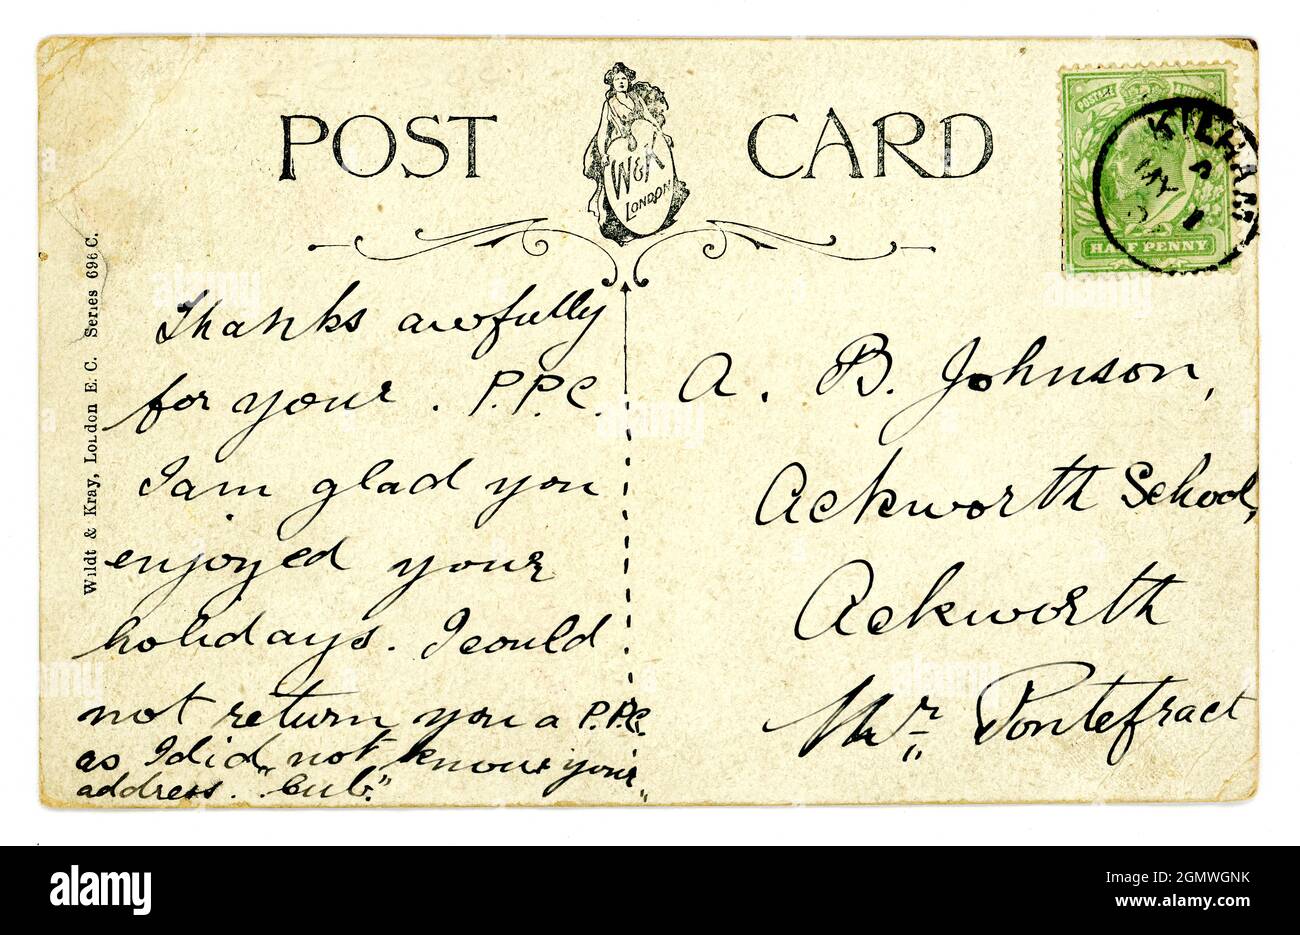 Reverse of original Edwardian era, early 1900's greetings postcard with attractive design and typeface. Published by Wildt and Kray, (W & K) London E.C indistinct postmark May 1 1907 (green half penny King Edward VII stamp) posted  East Riding of Yorkshire, U.K. Stock Photo